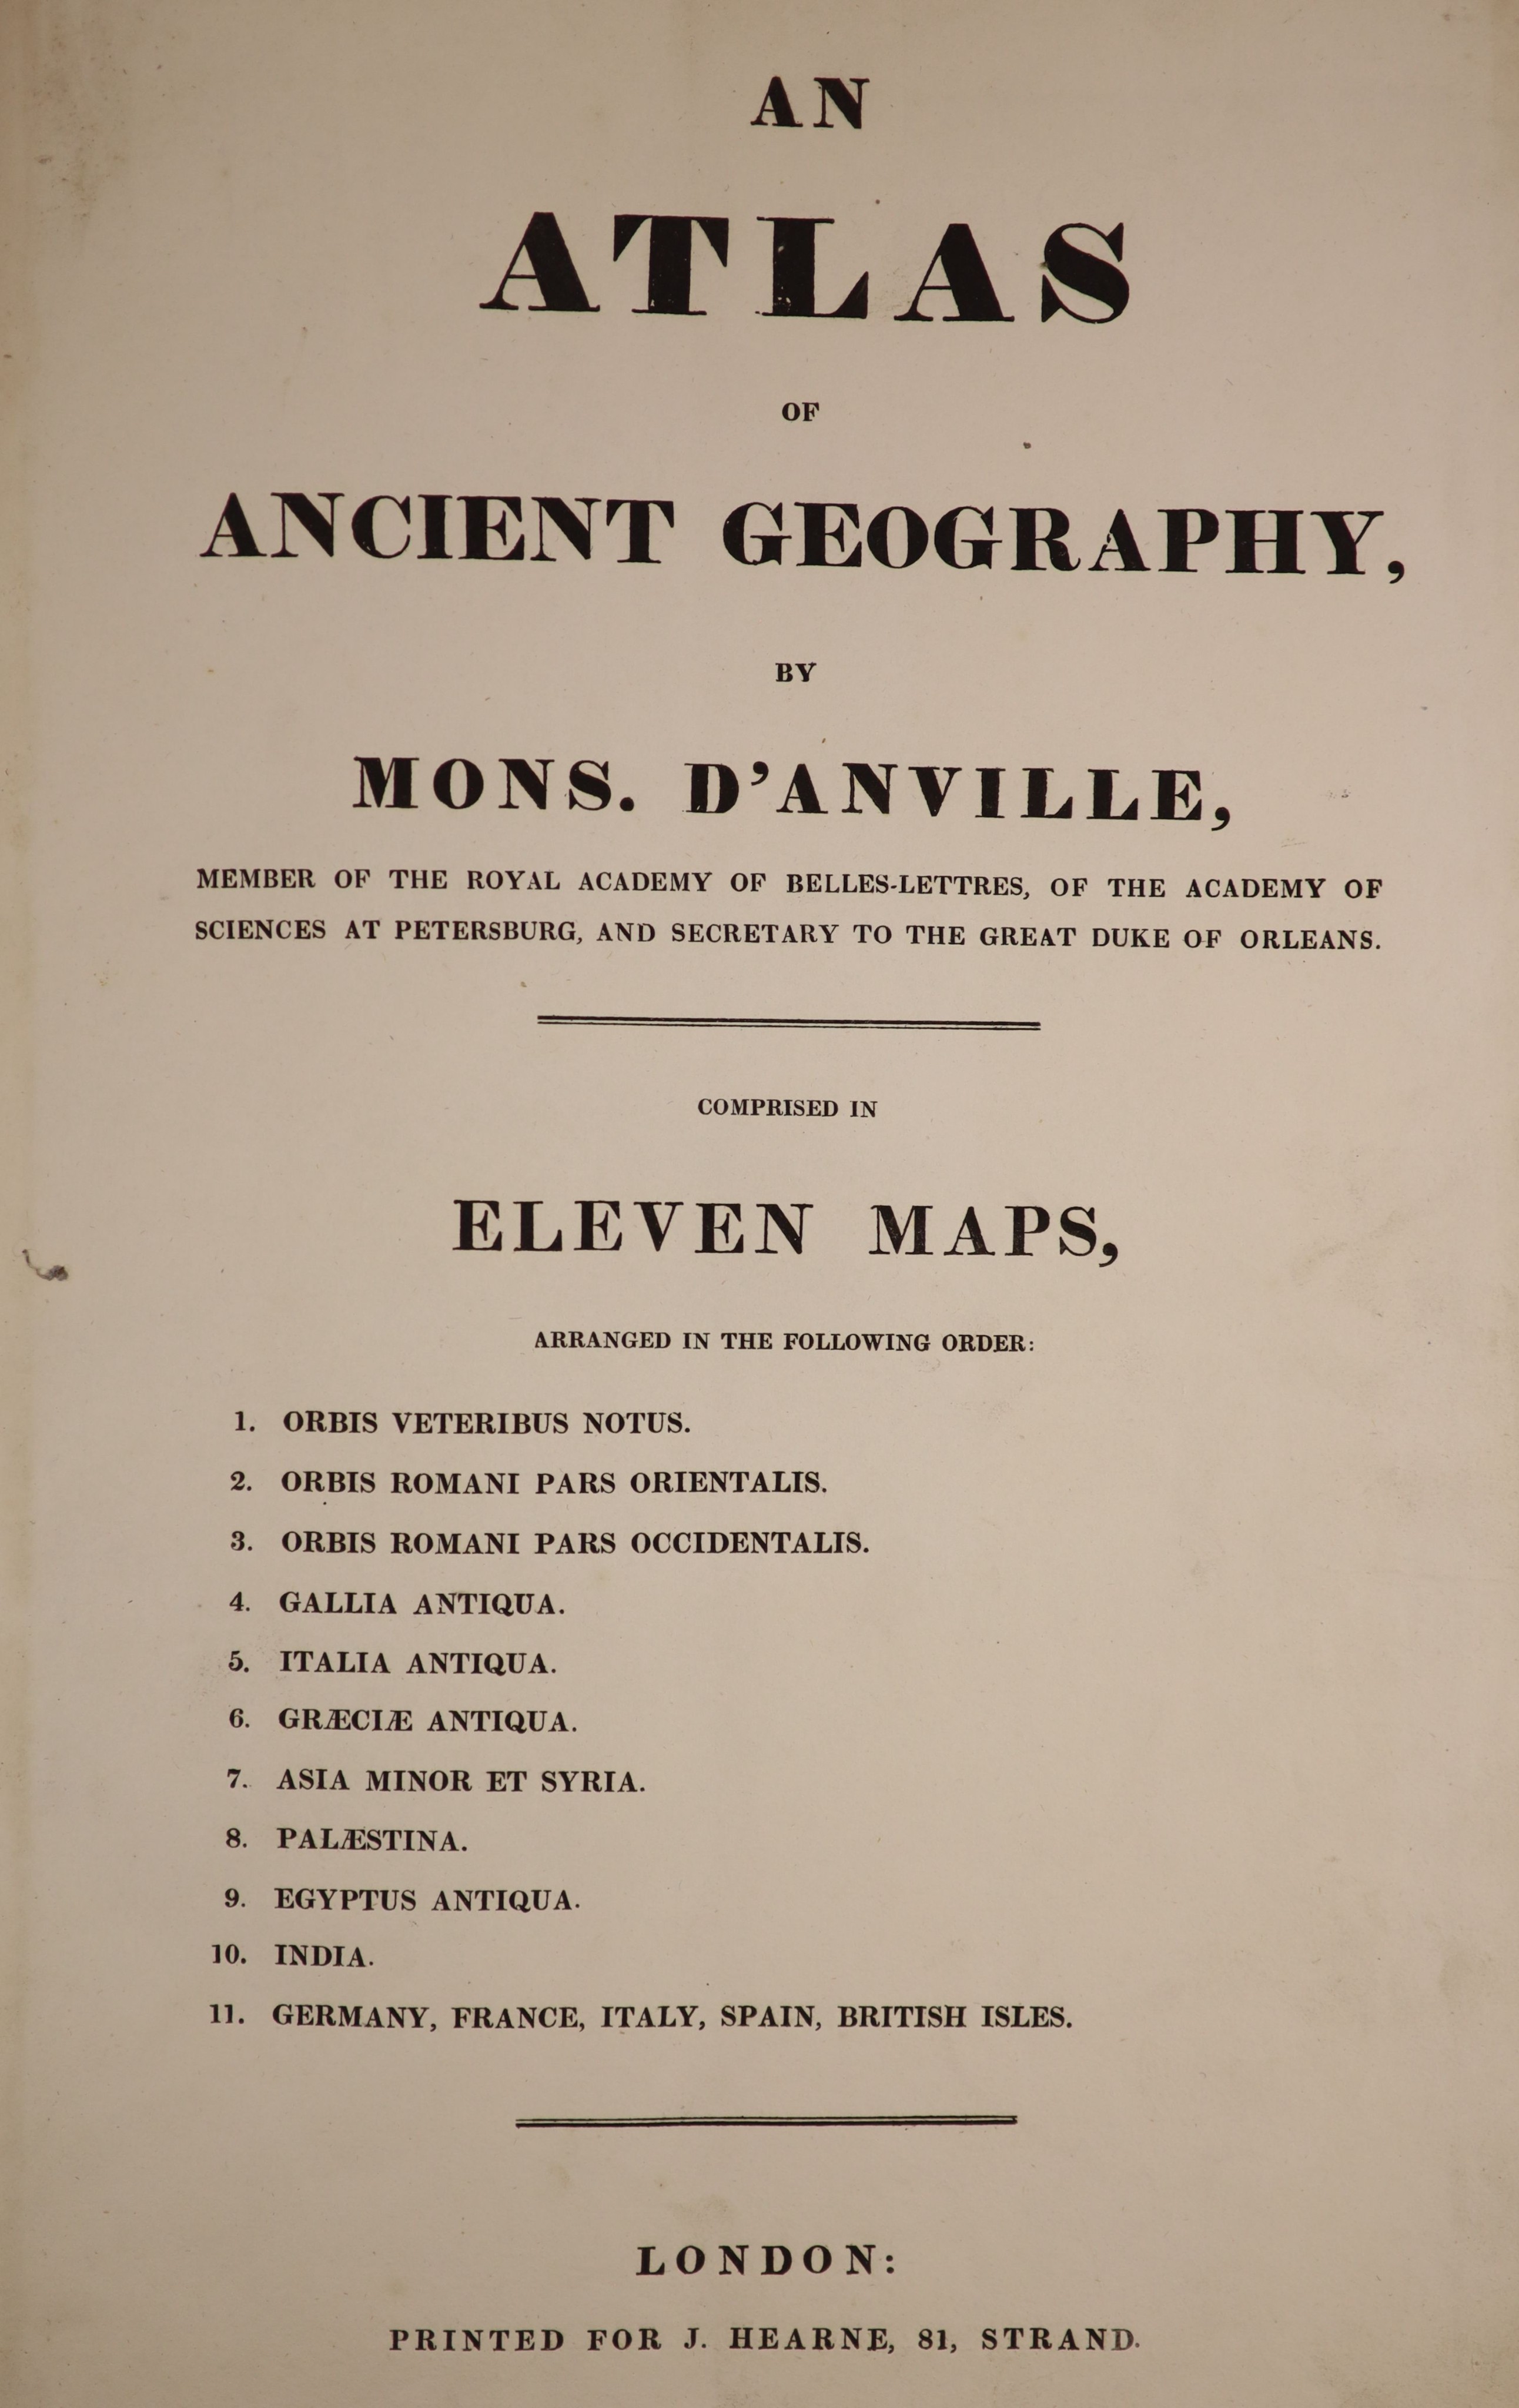 d’Anville, Jean Baptiste Bourguignon - An Atlas of Ancient Geography, folio, half red morocco, marbled boards, scuffed and torn, with 11 coloured engraved maps, J. Hearn, London, nd